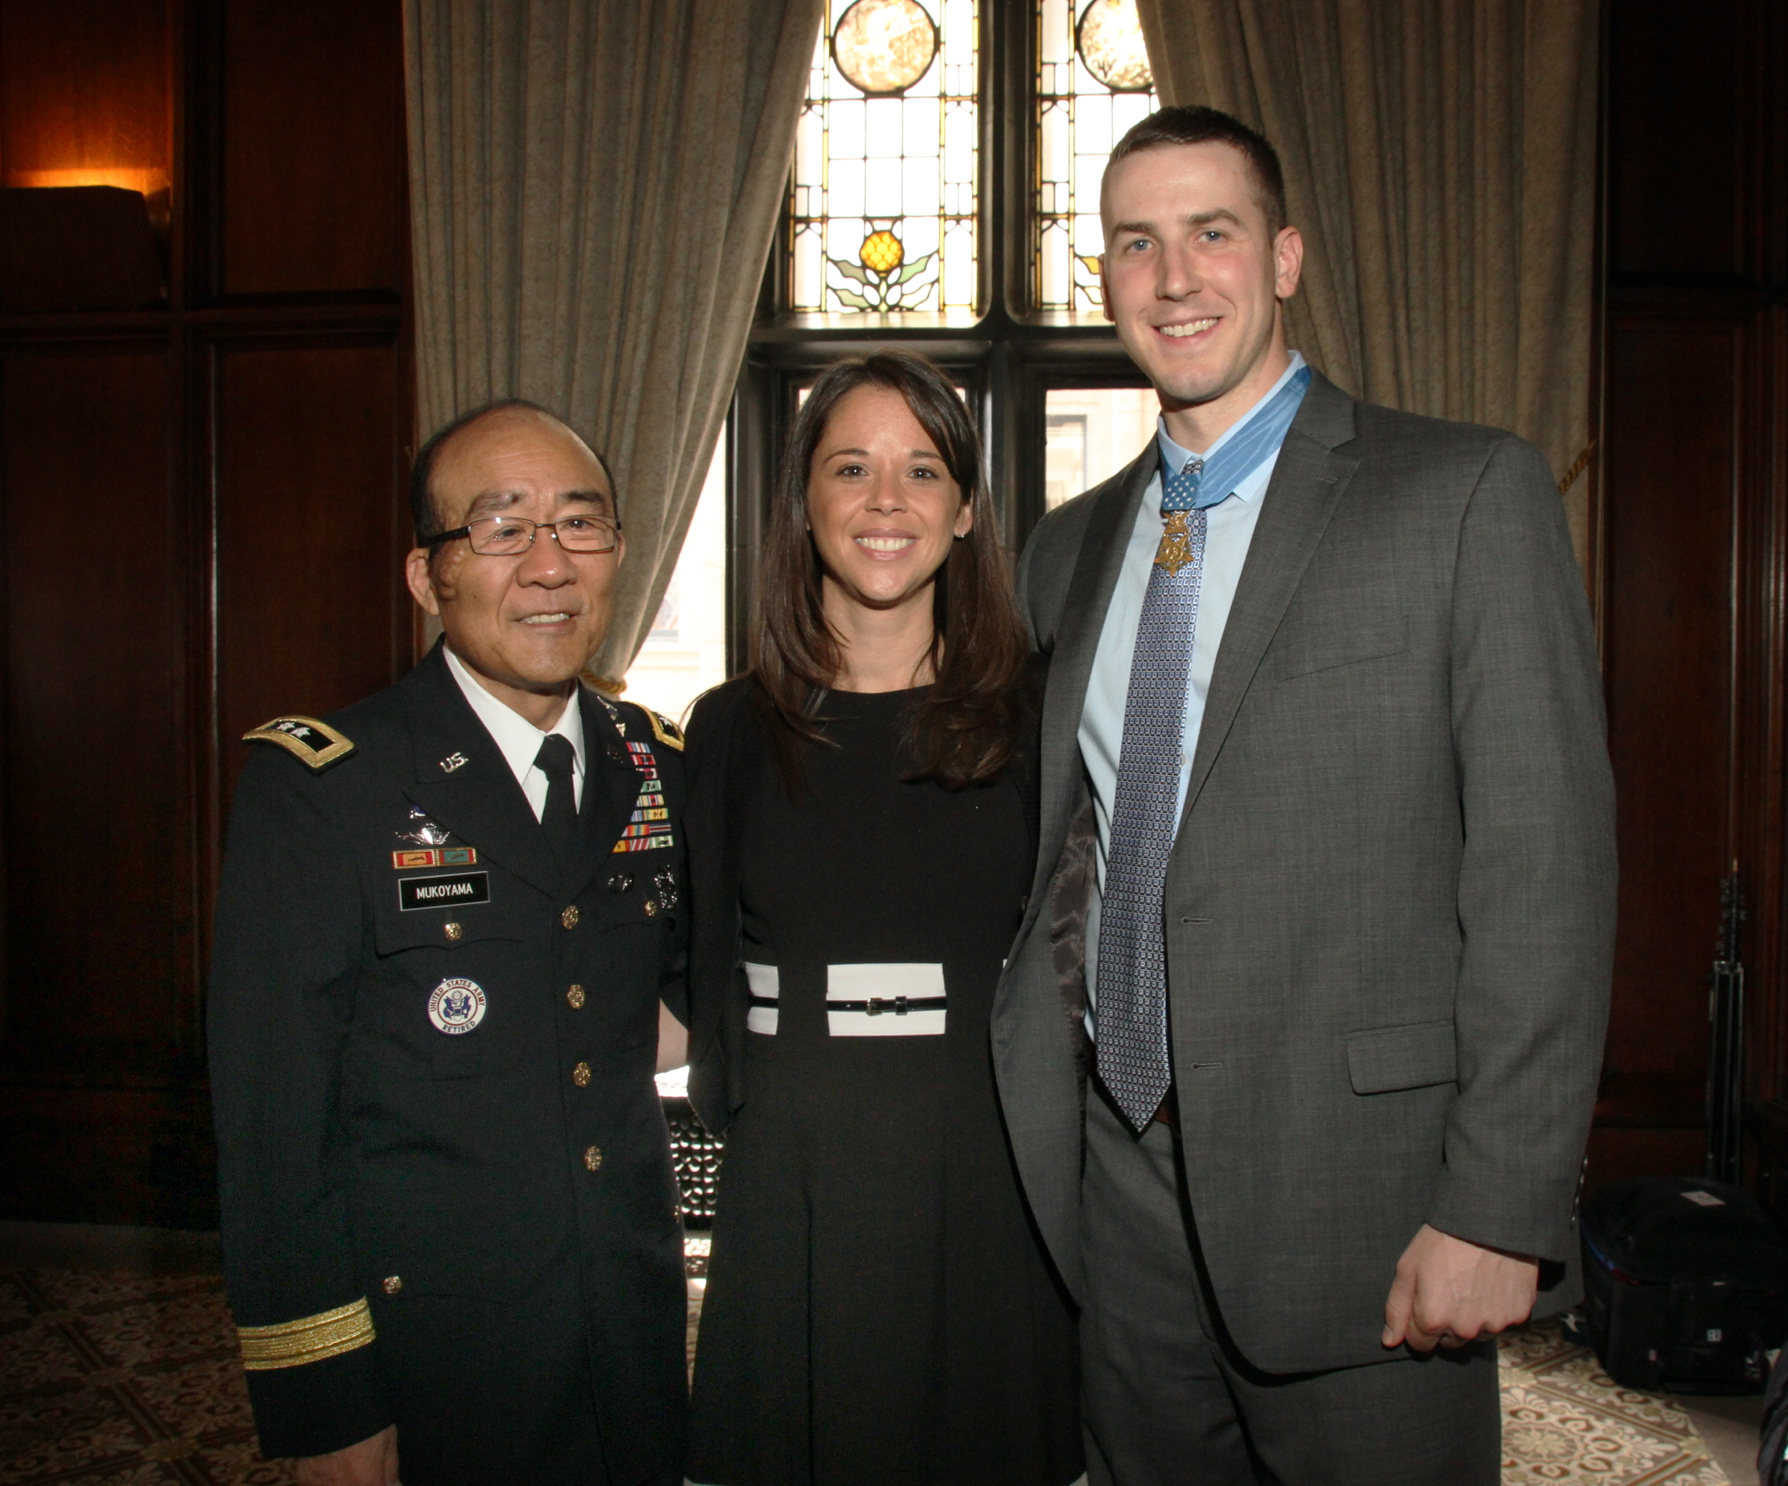 Medal of Honor recipient Master Sgt. Ryan Pitts